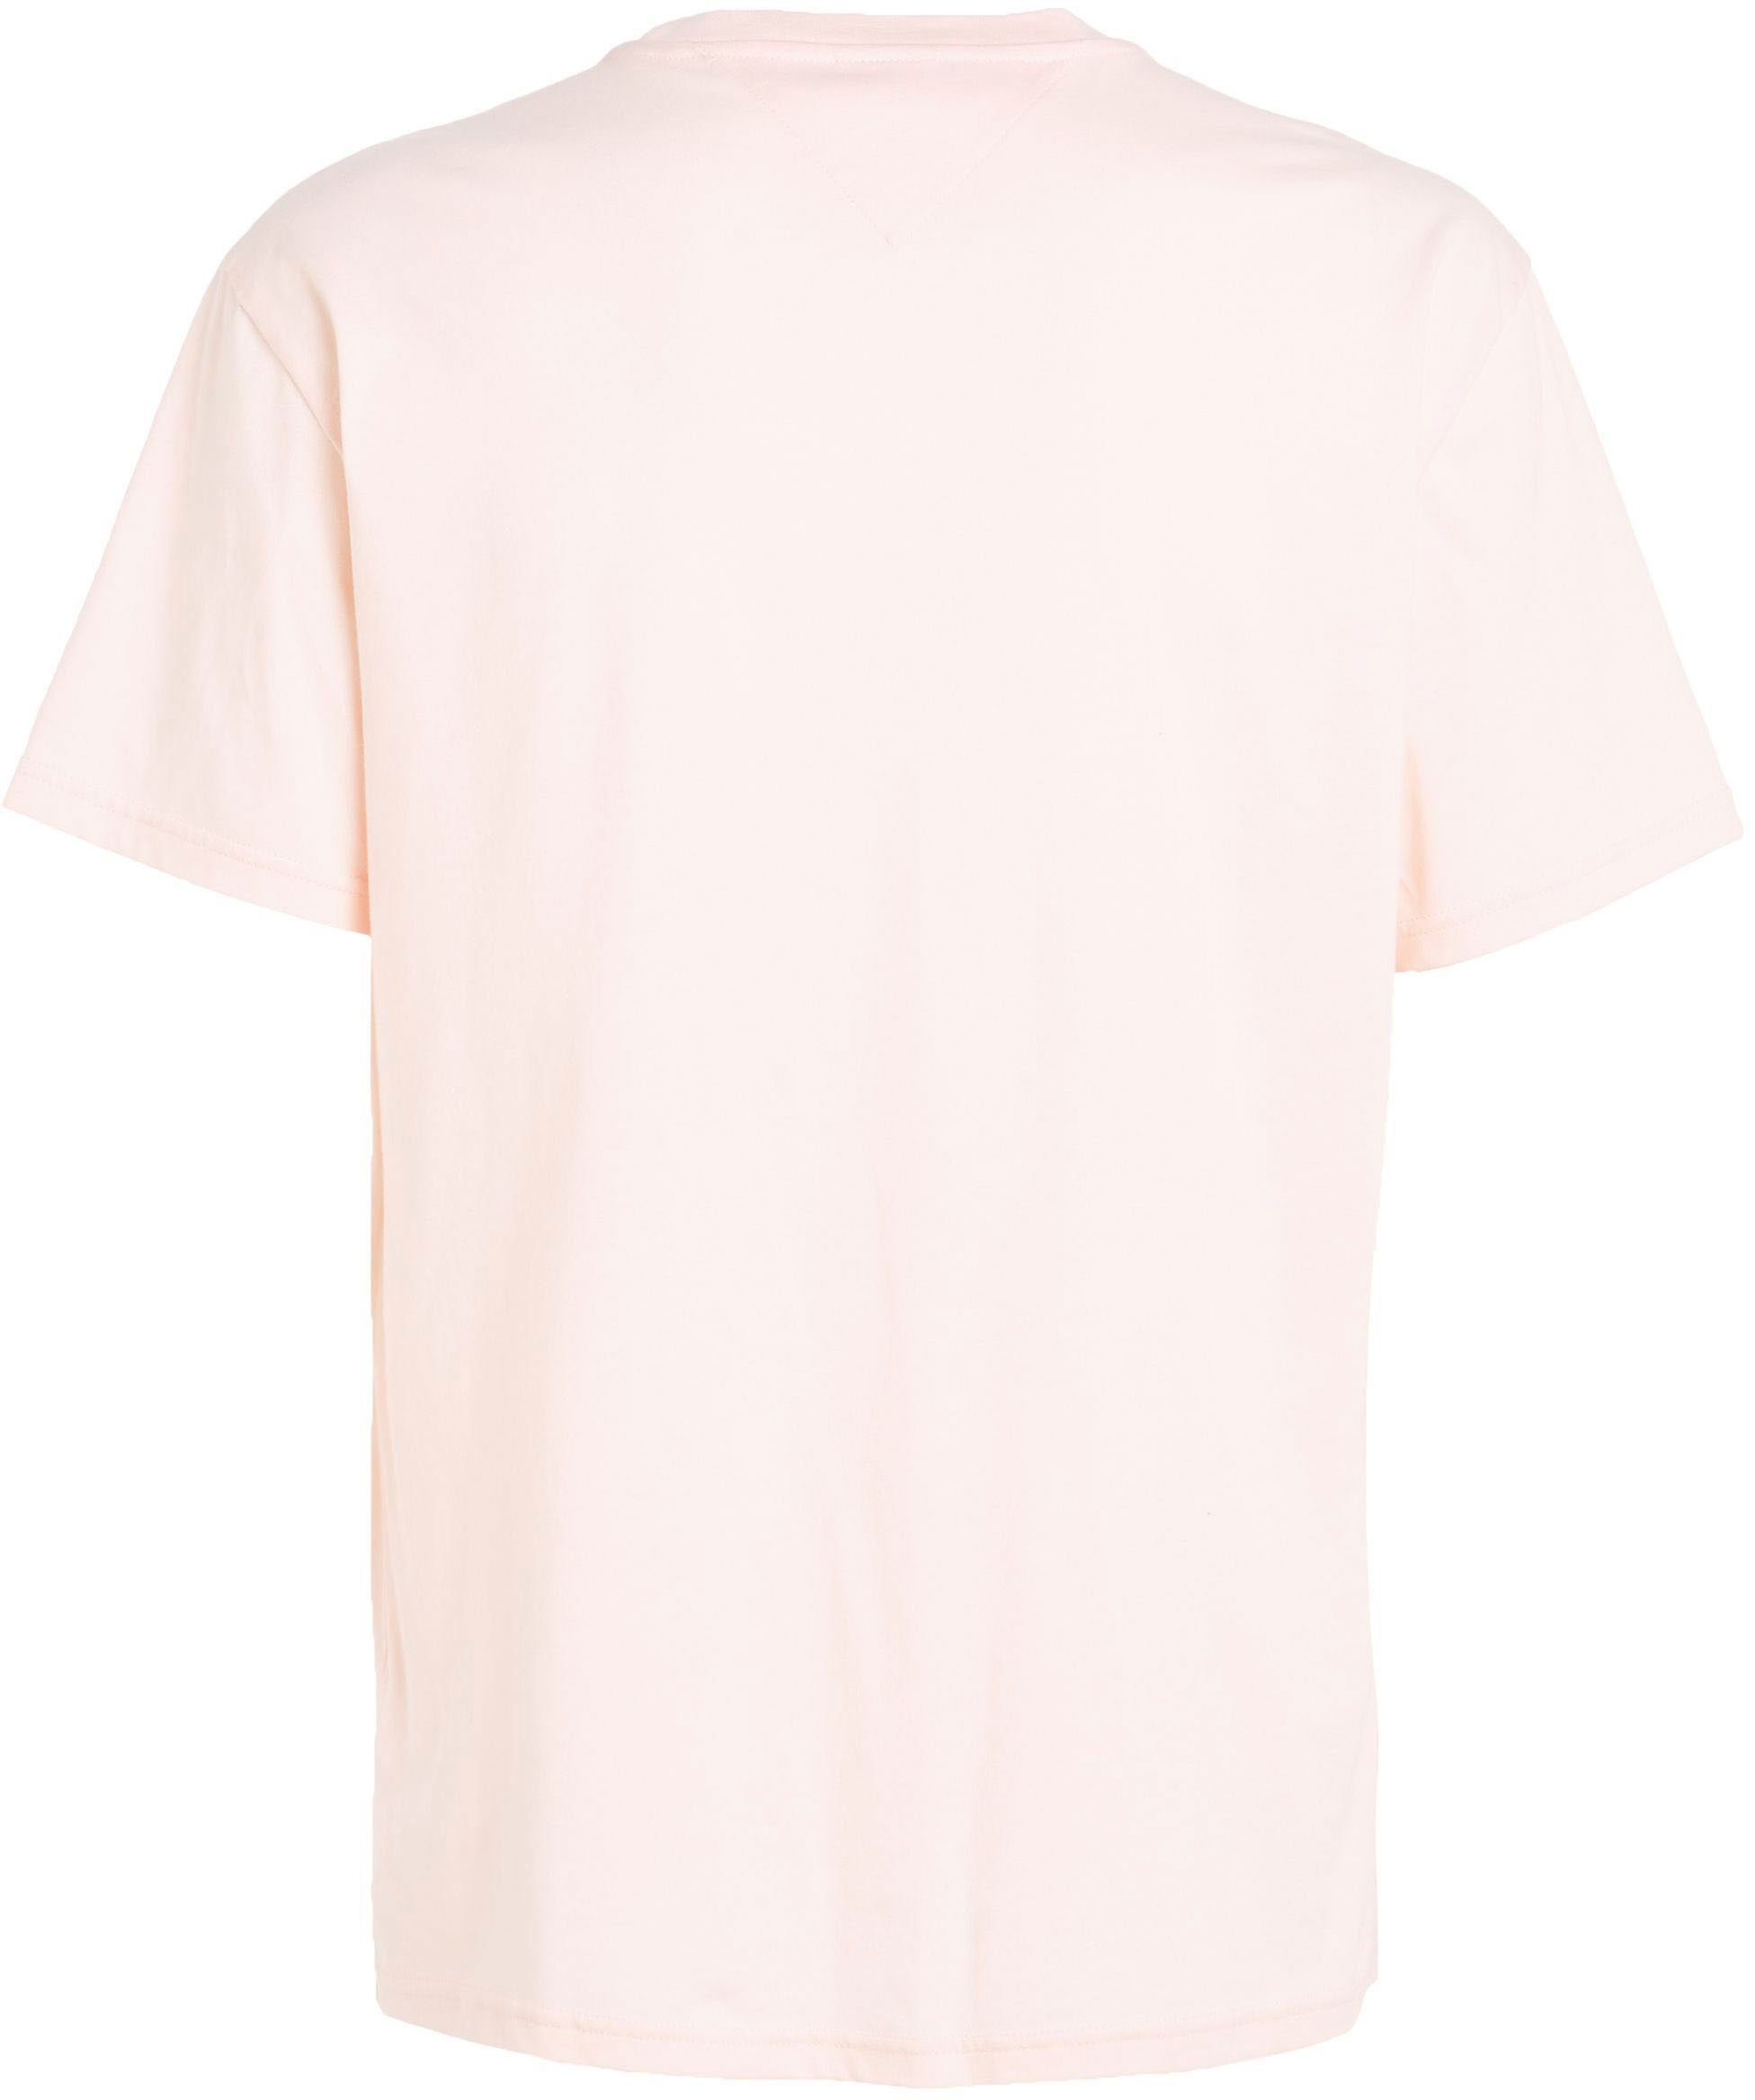 TJM CLSC Faint SMALL Jeans T-Shirt TEXT Pink TEE Tommy